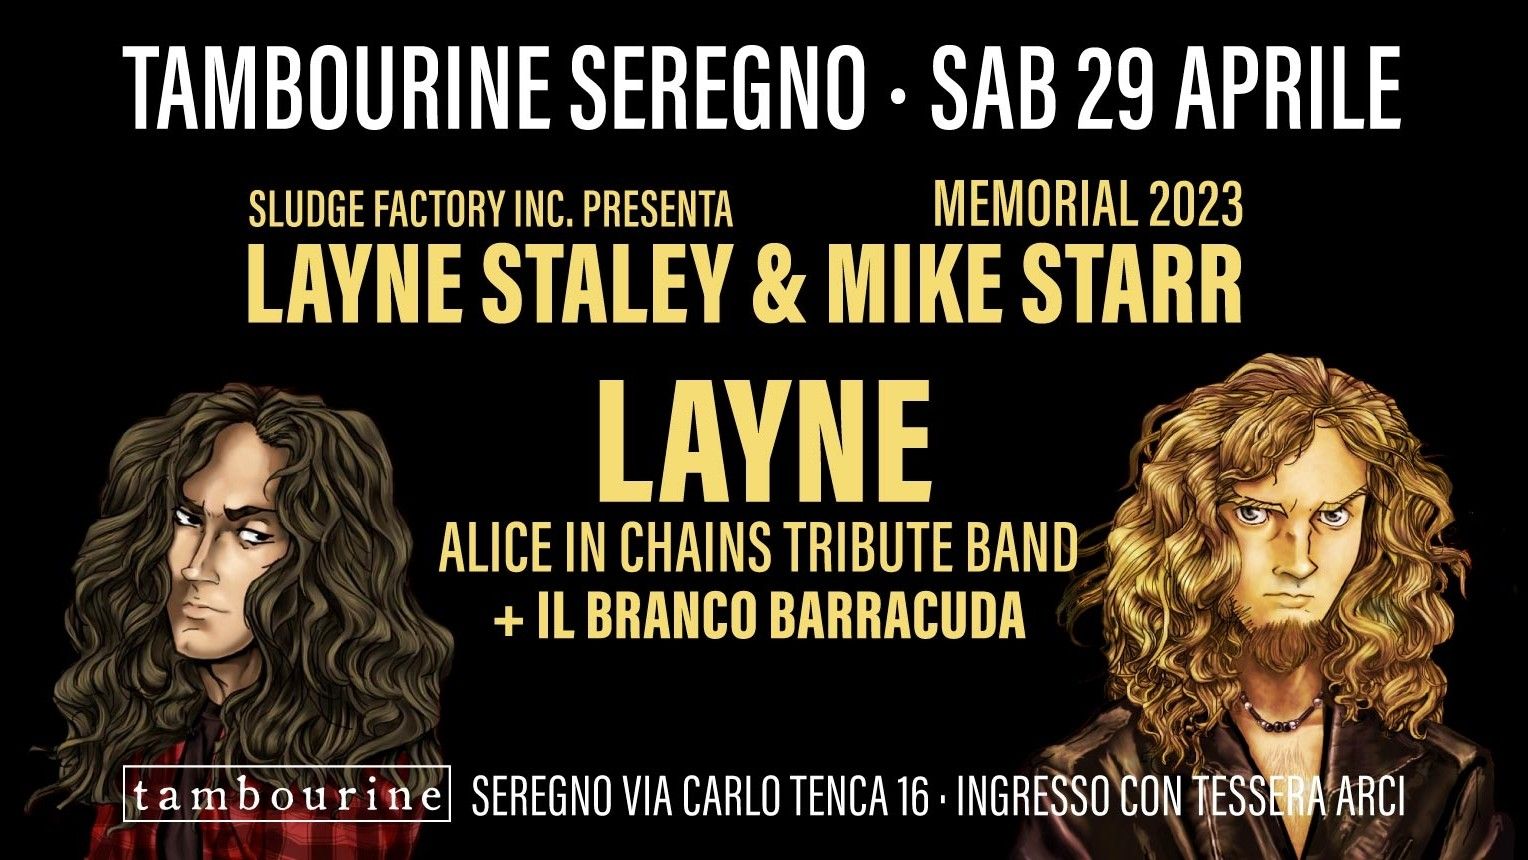 Layne Staley & Mike Starr Memorial - Layne Alice In Chains Tribute Band